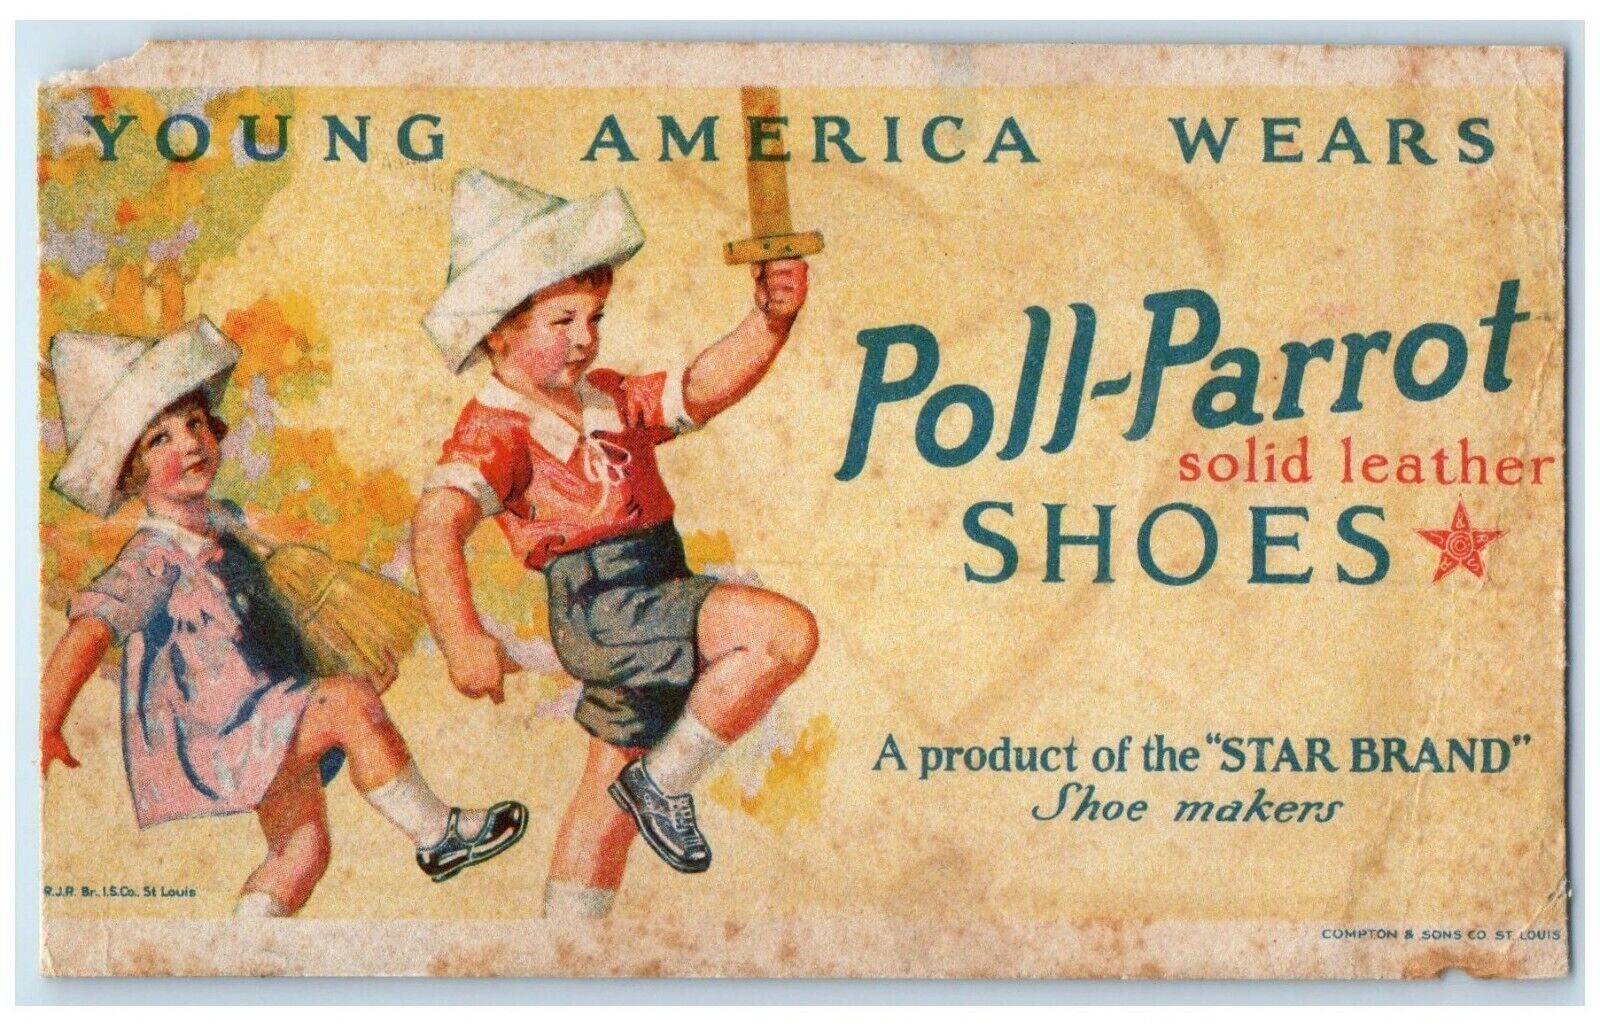 c1905 Young America Wears Poll Parrott Solid Leather Shoes Advertising Postcard